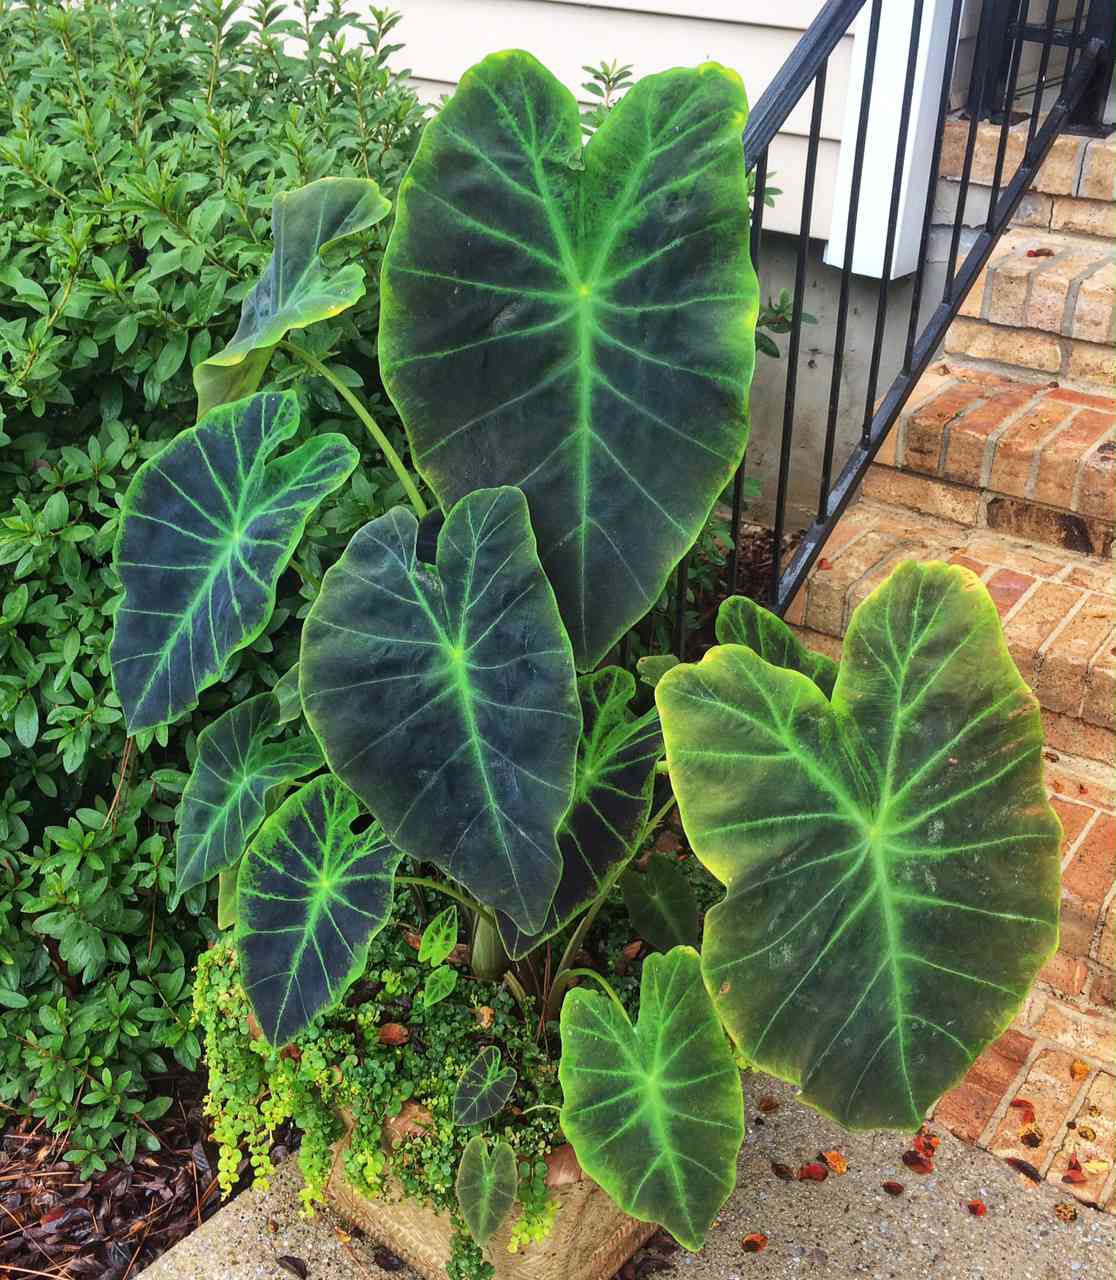 Reasons Why You Should Add Elephant Ear Plants to Your Garden